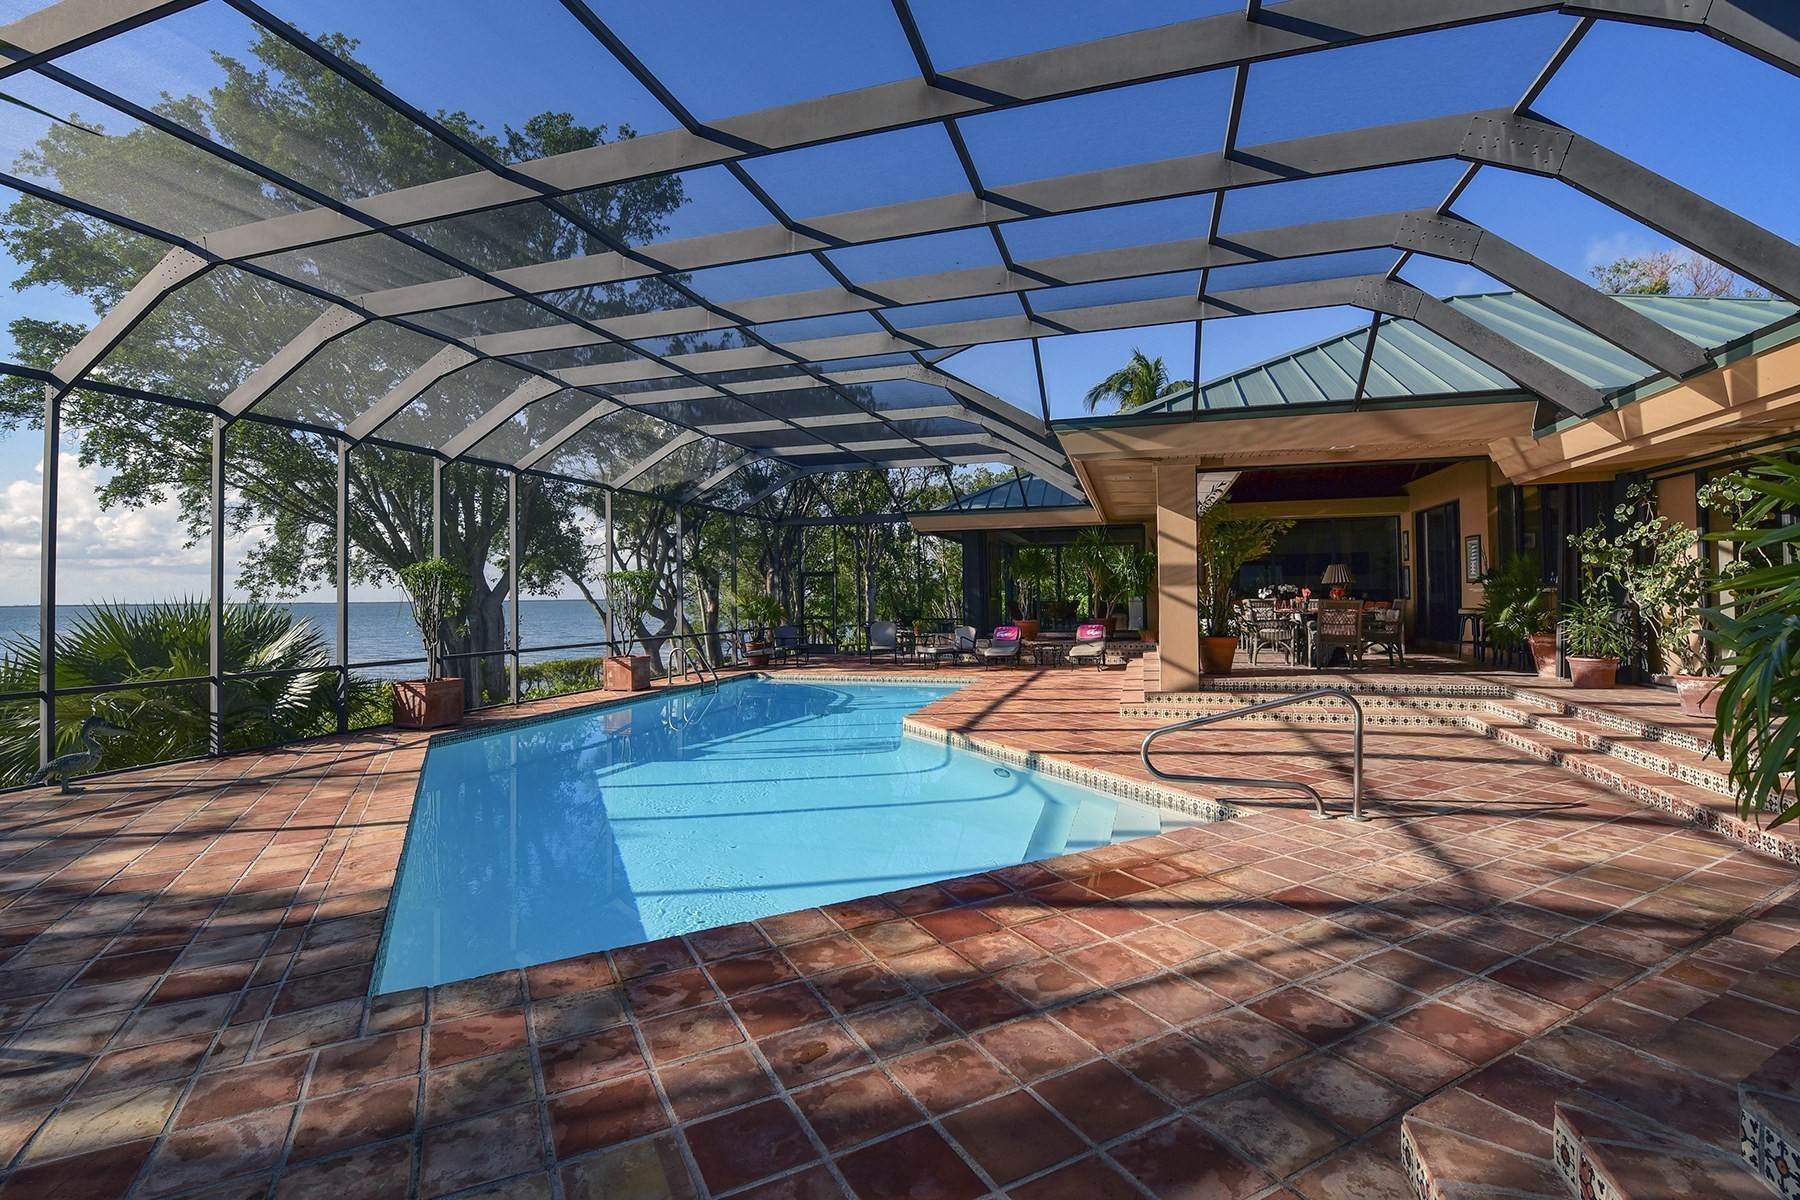 11. Property for Sale at Pumpkin Key - Private Island, Key Largo, FL Pumpkin Key - Private Island Key Largo, Florida 33037 United States